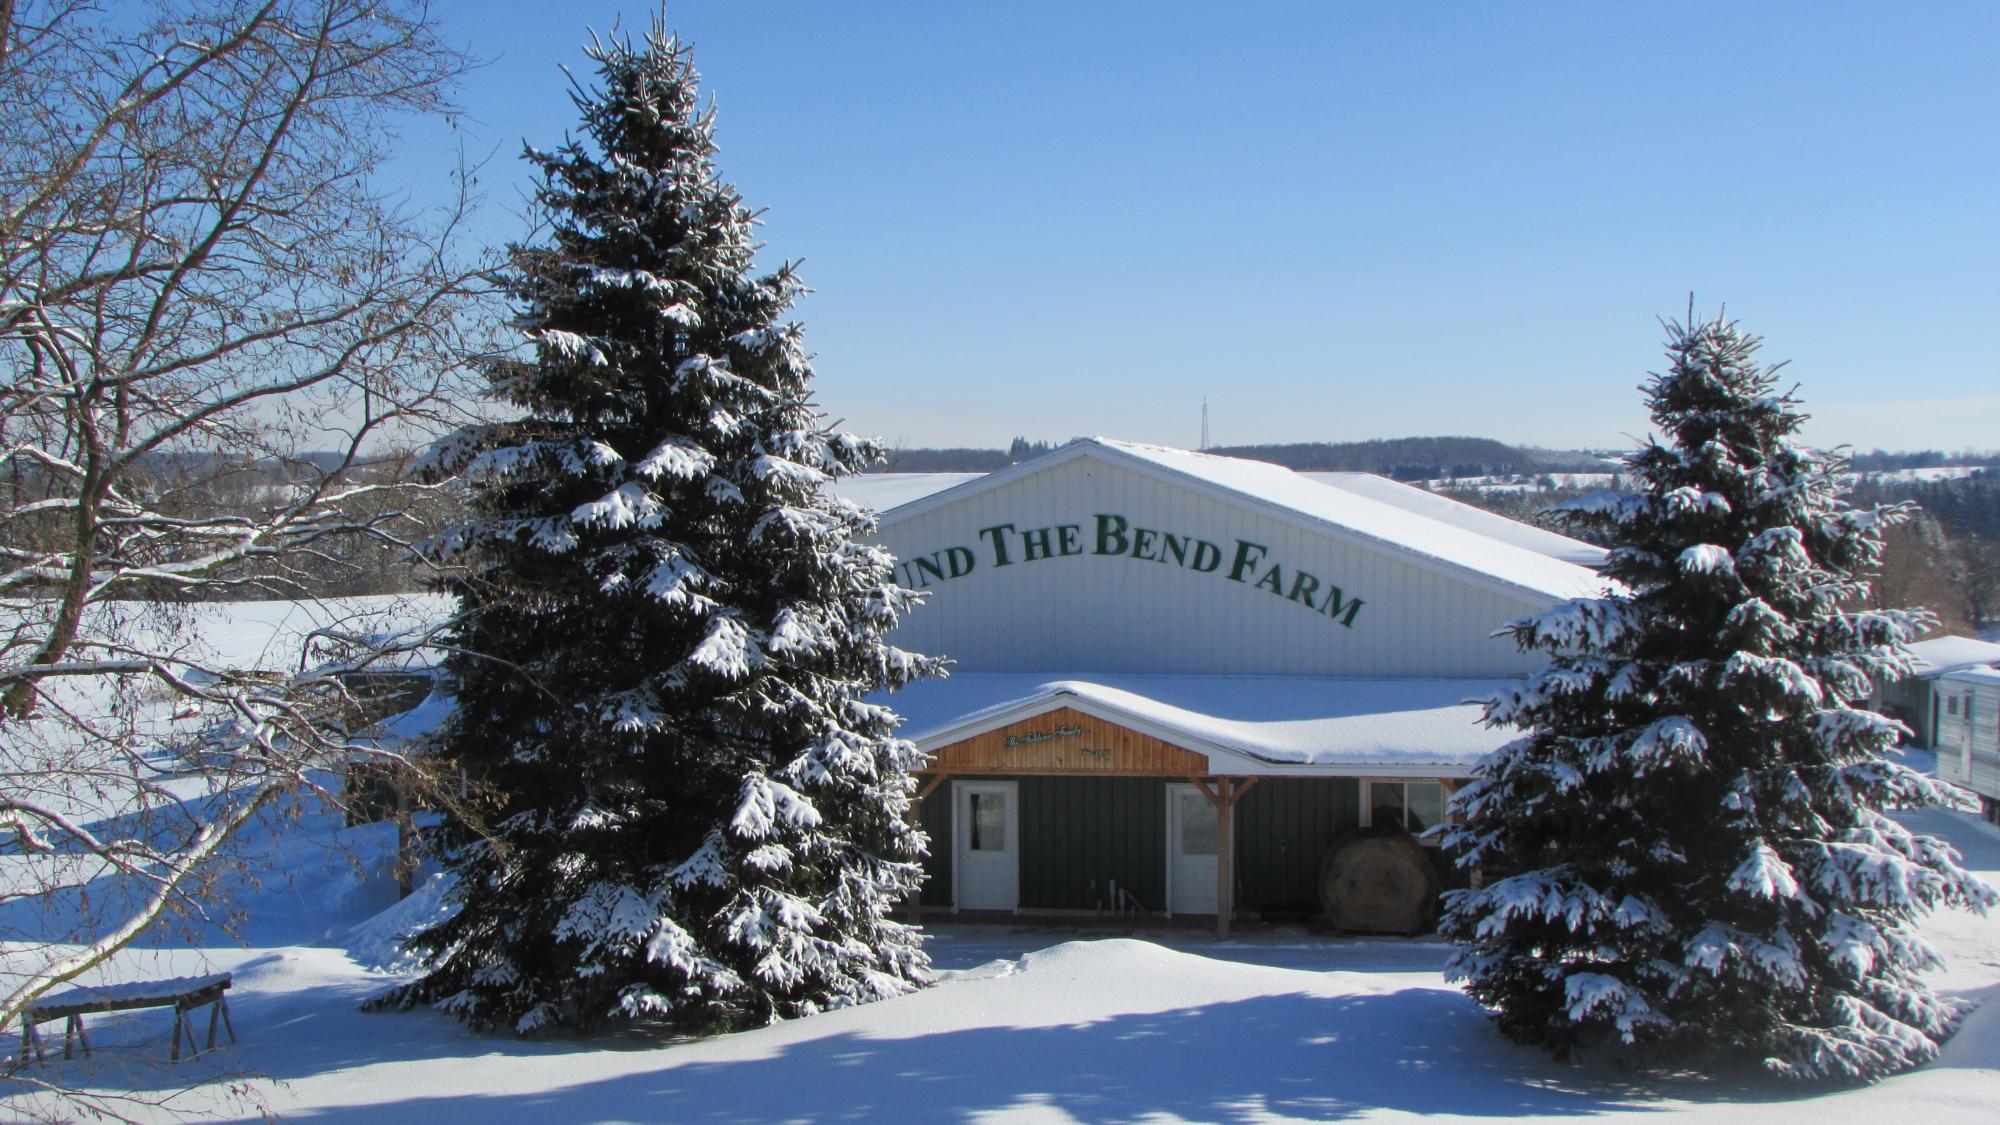 Round the bend farm exterior in the snow